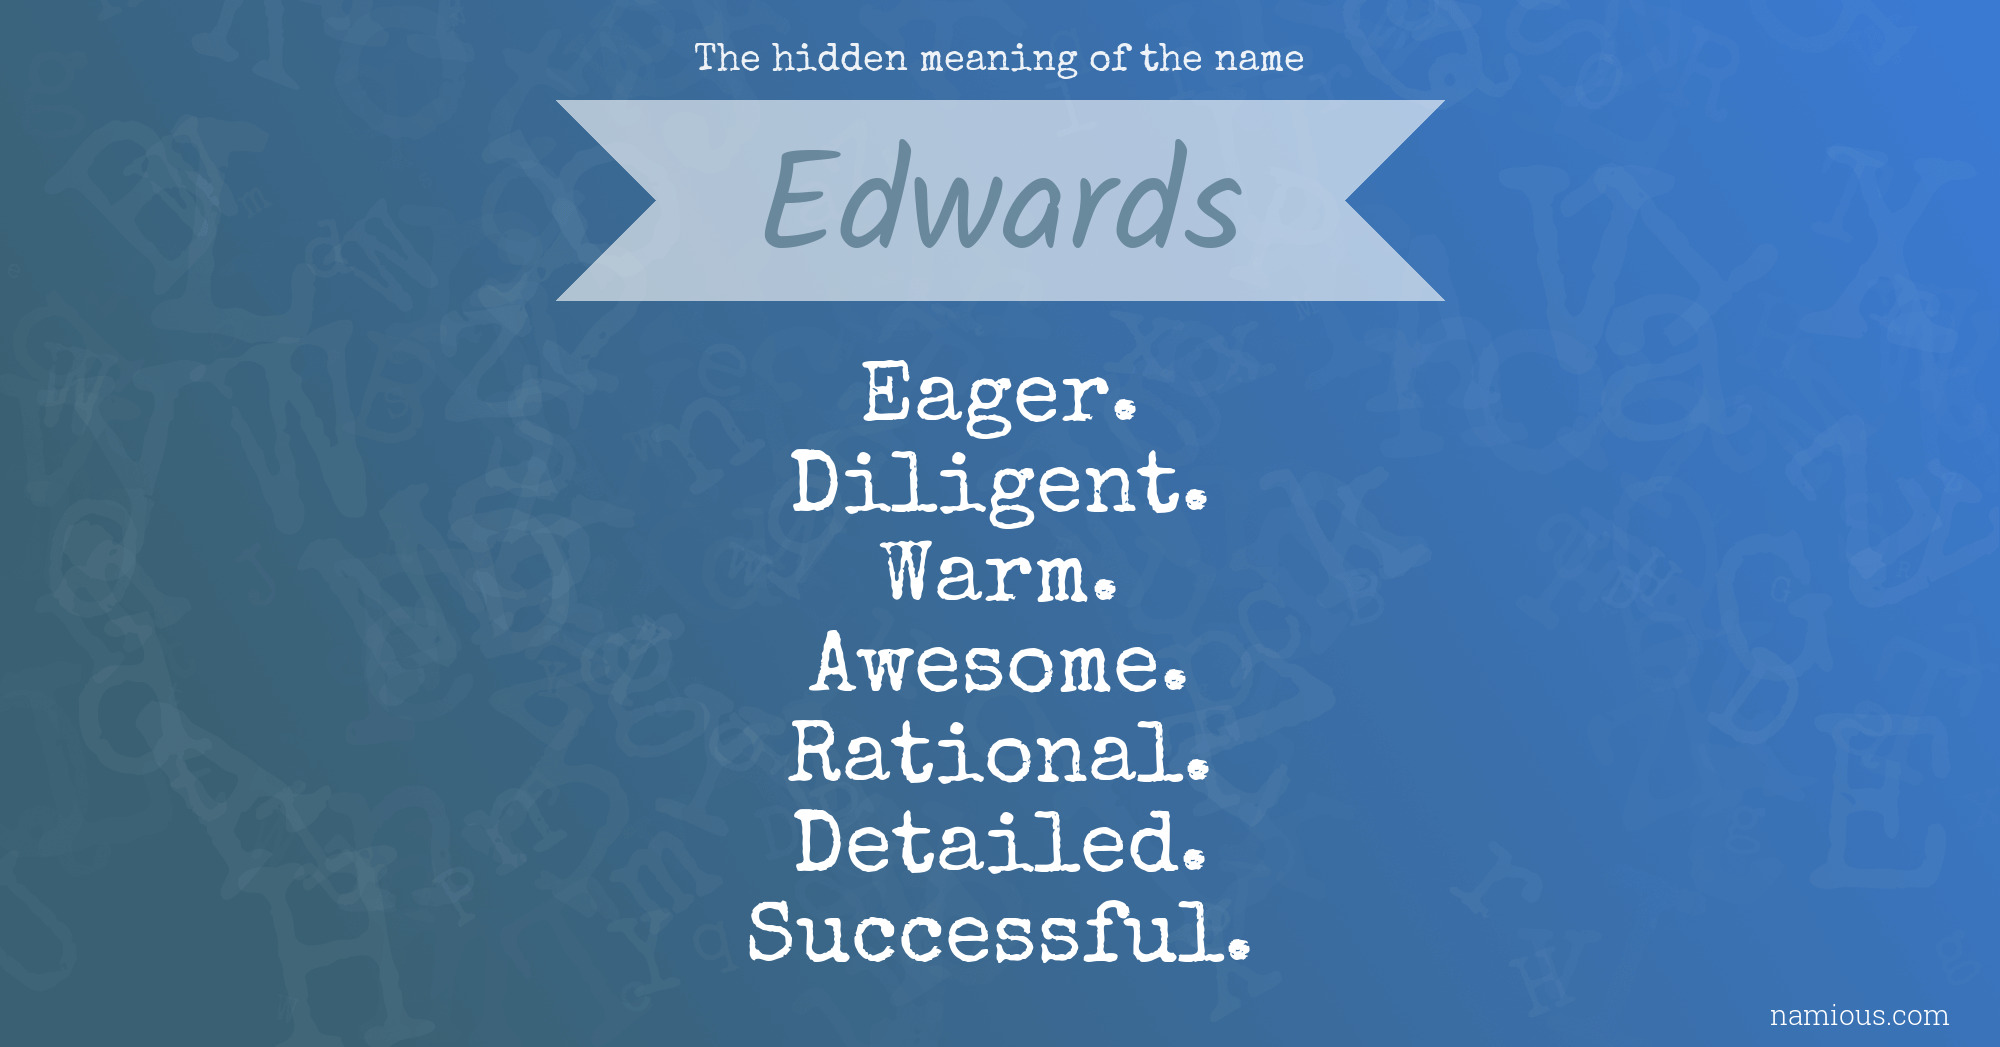 The hidden meaning of the name Edwards